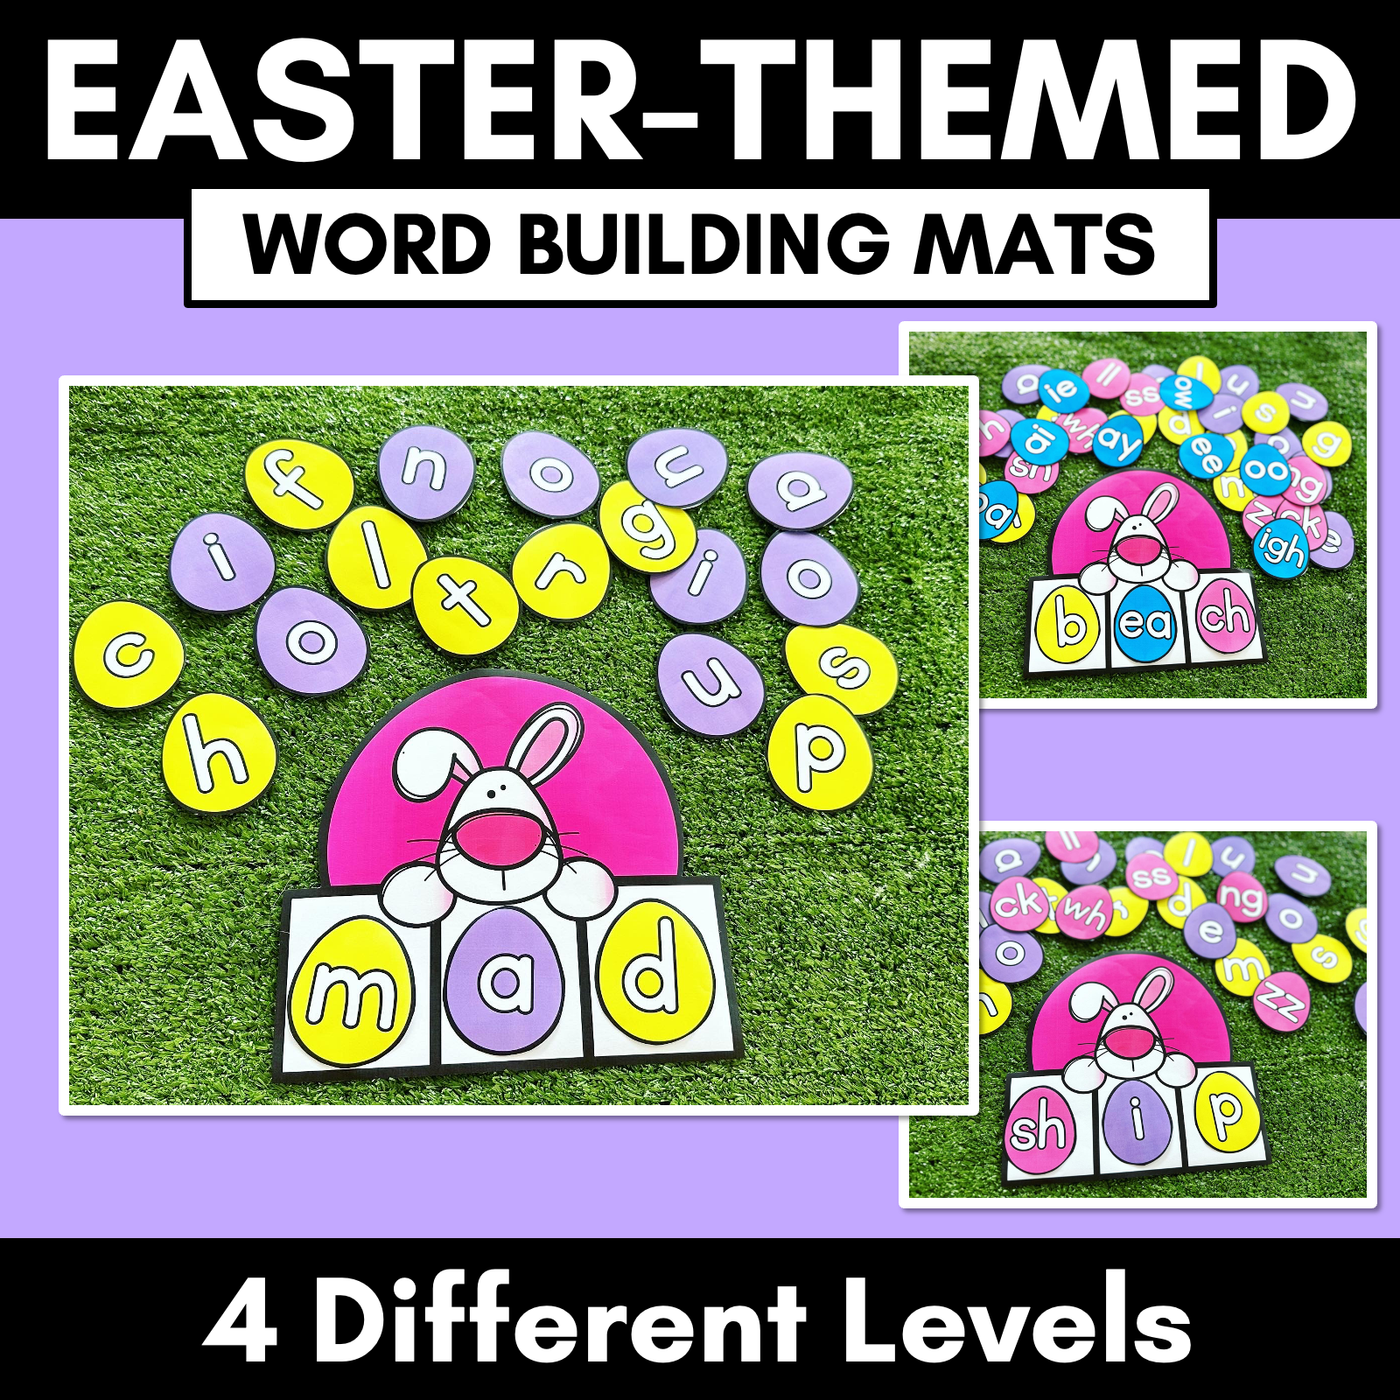 Easter-themed Activities - Word Building Mats for Phonics Lessons